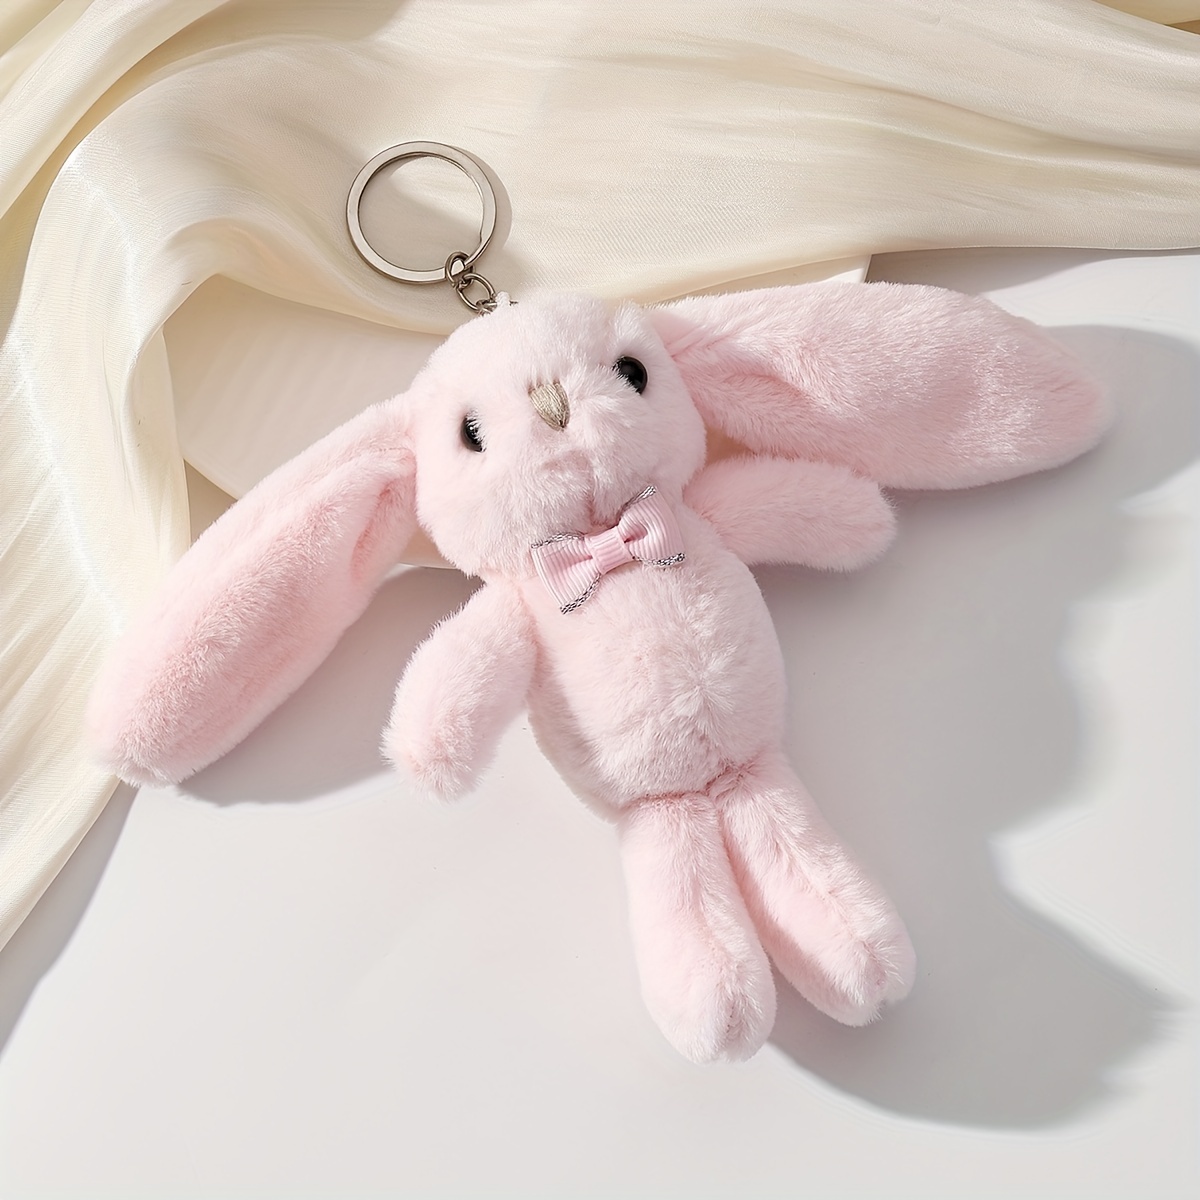 New Stylish creative Pull the movable rabbit Plush doll keychain Net red  popular doll machine gift bag pendant funny gift